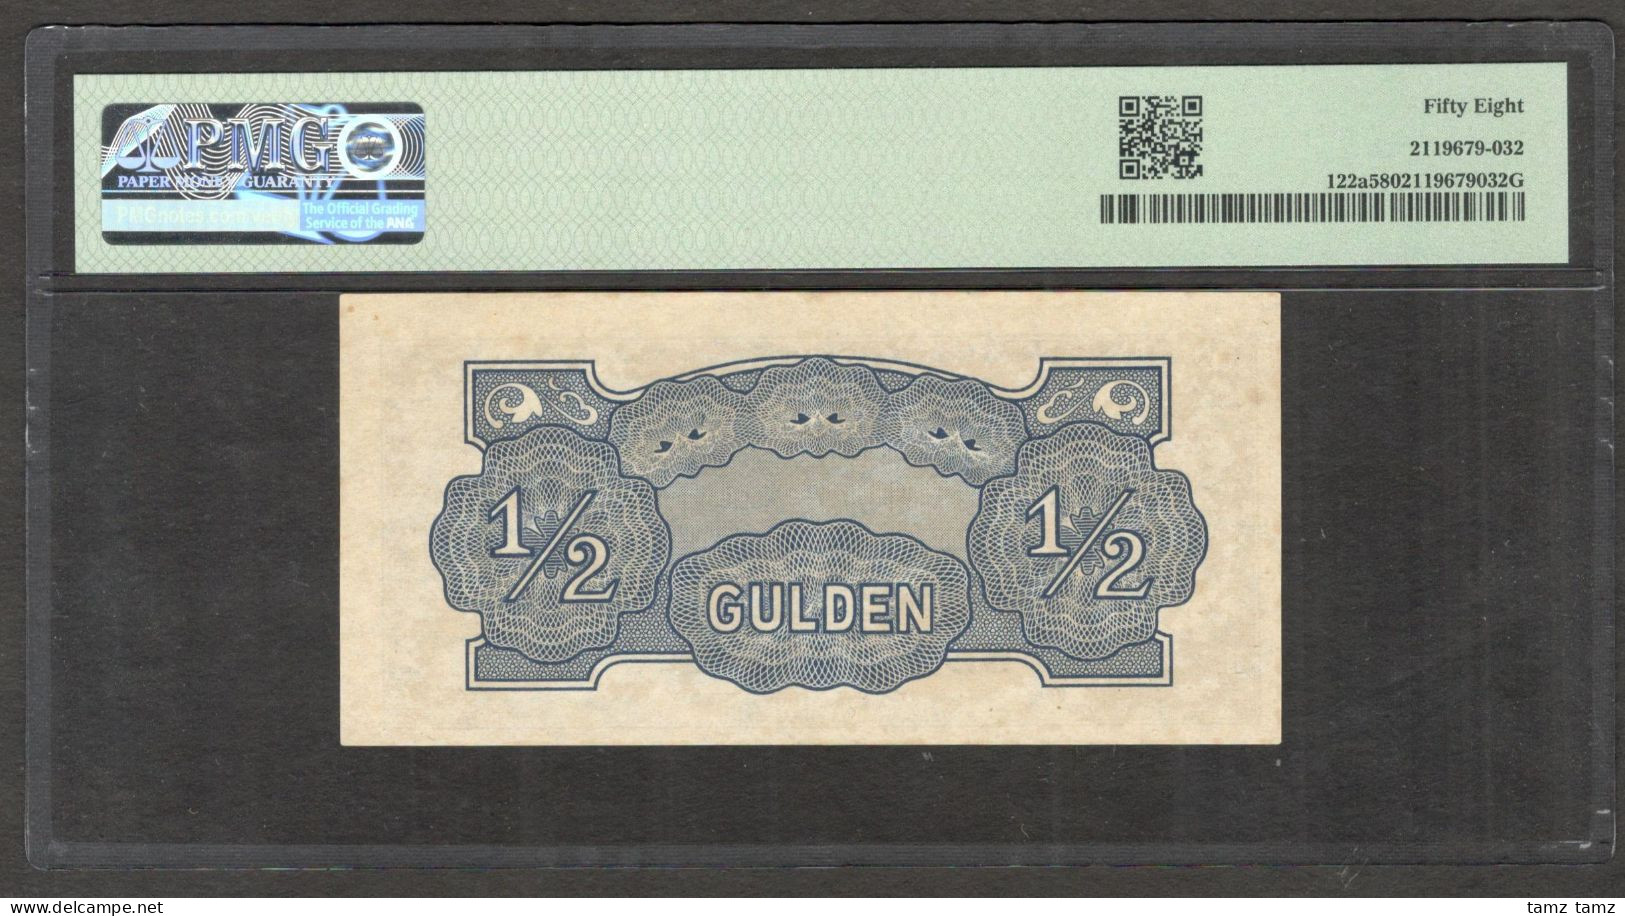 Japanese Occ Indonesia 1/2 0.5 Gulden Block SD Scarce P-122a 1942 PMG 58 Ch AUNC - Indonesia